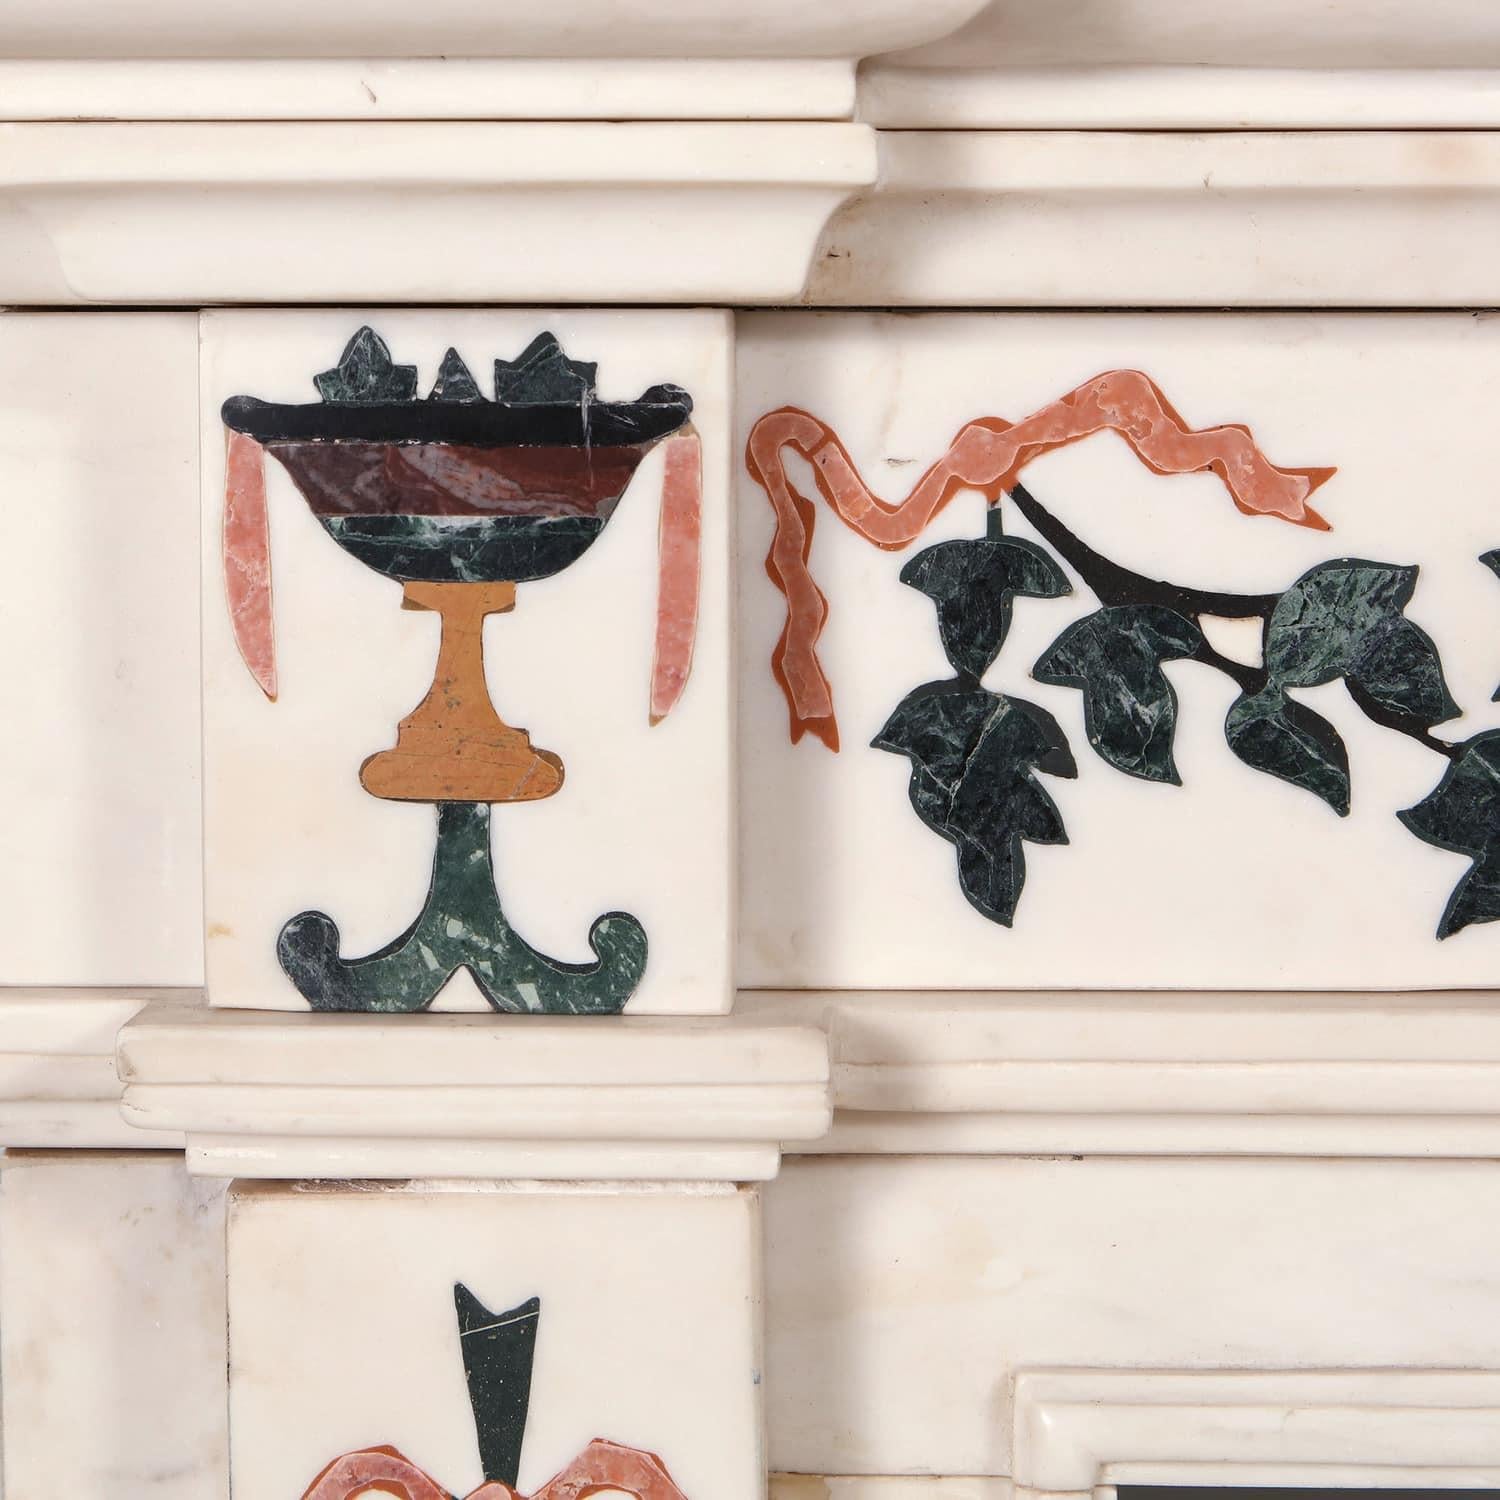 A white statuary marble neoclassical fire surround inlaid with classical vases, vine leaves and fruit with colored marbles.
England, 20th century
Measures: Height 130cm 51in
Width 162cm 64in
Depth 30cm 12in
Aperture 102 x 103cm - 40 x 40.5in.